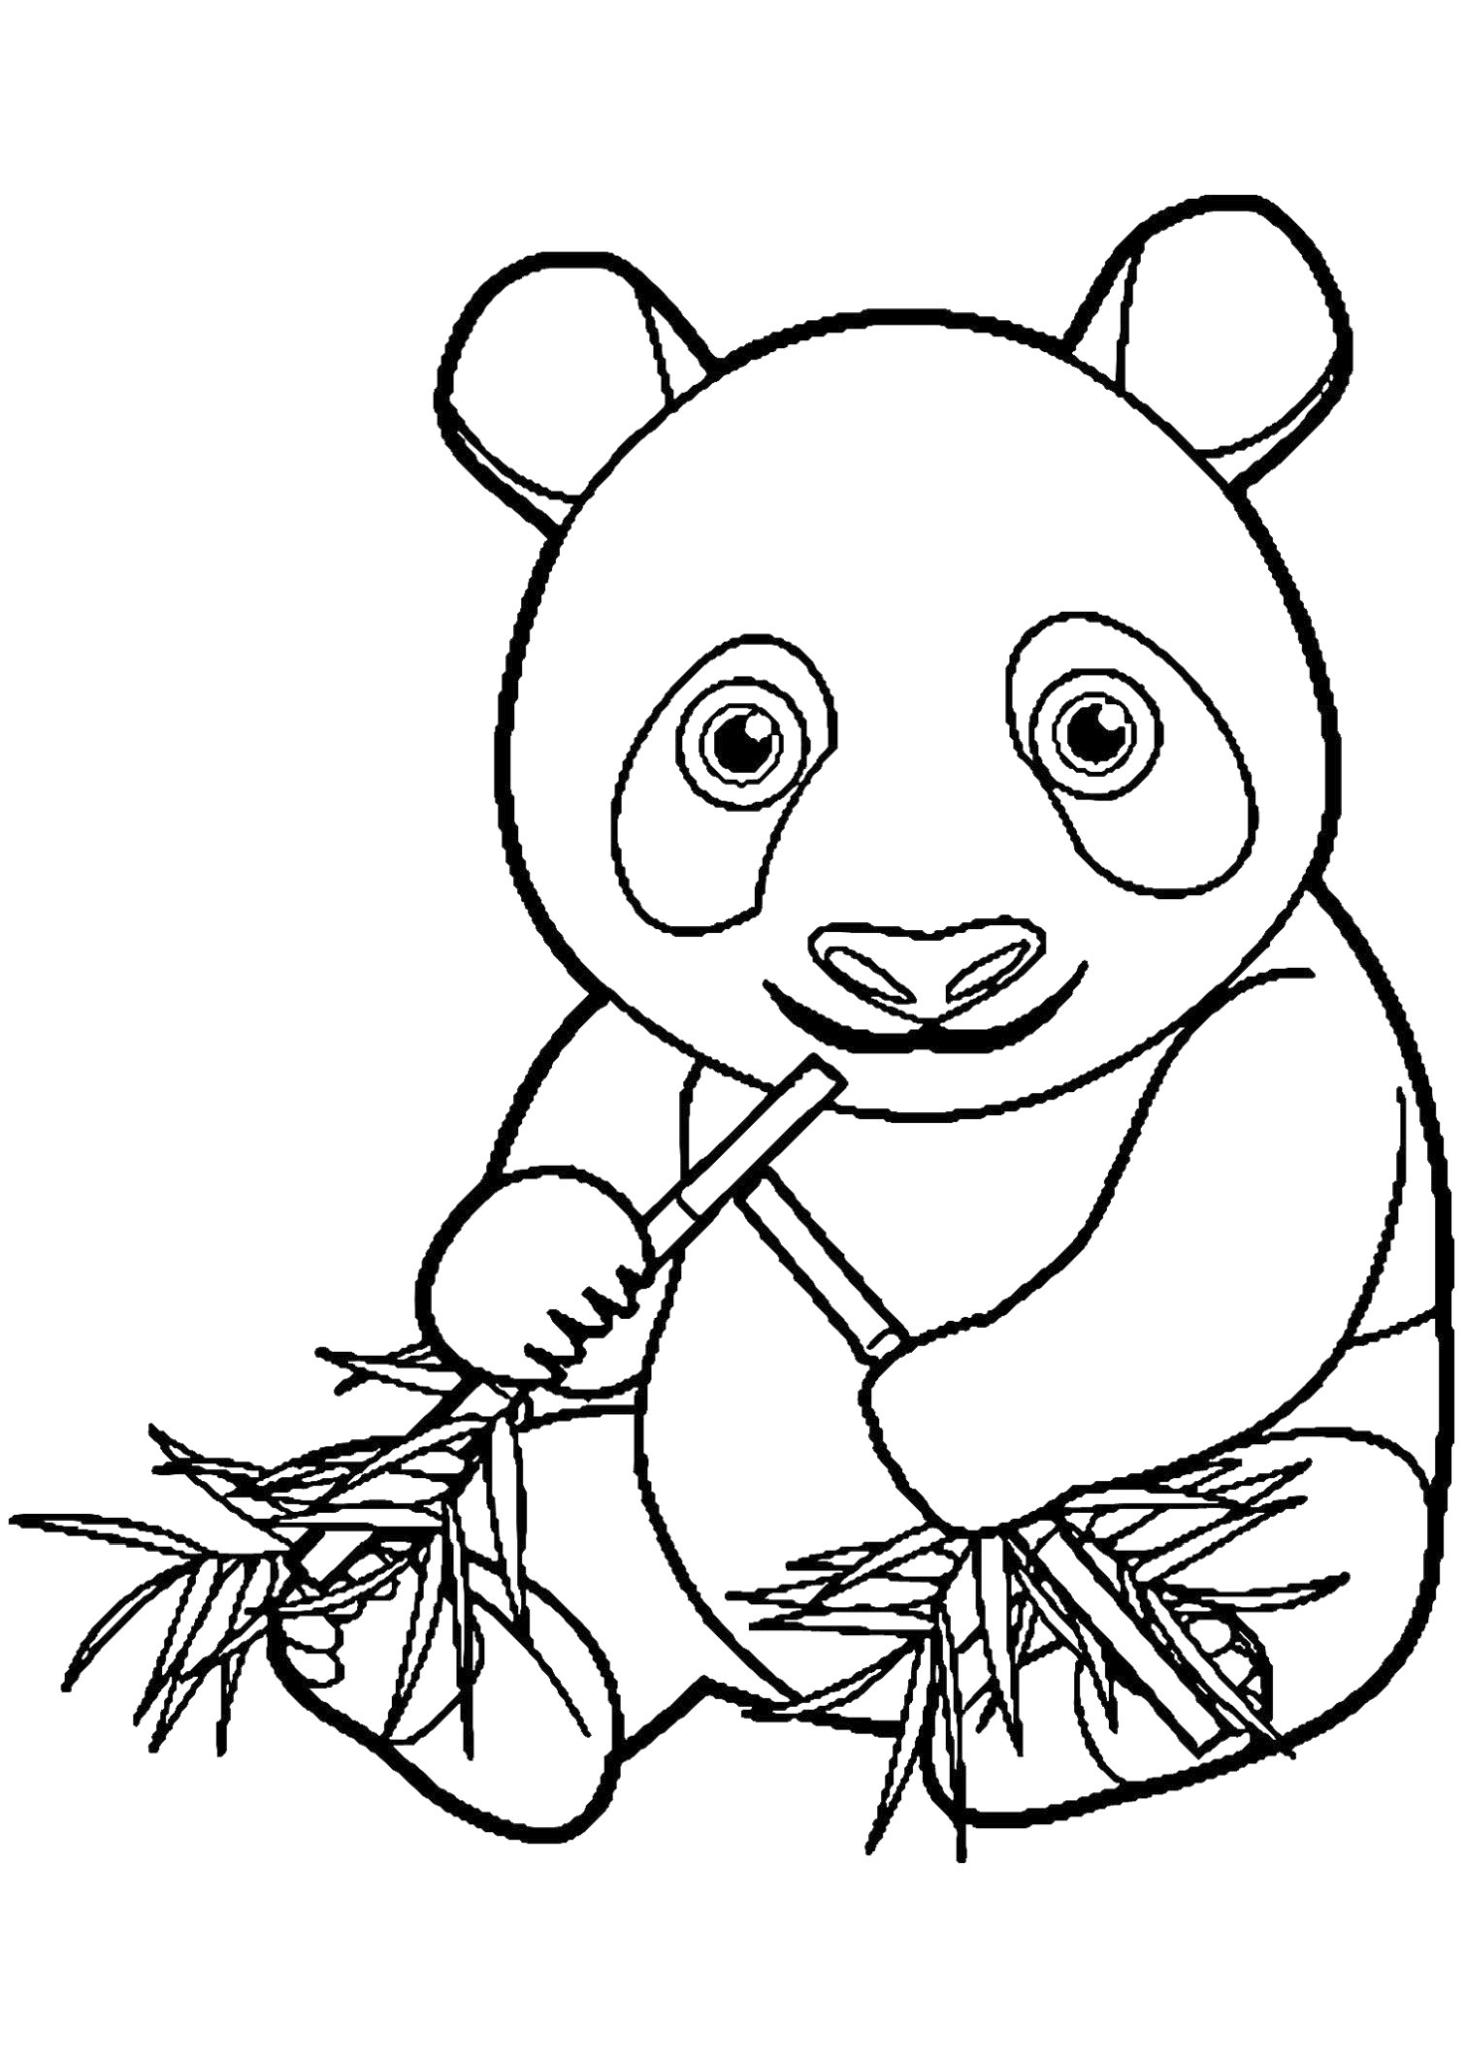 get-this-panda-coloring-pages-free